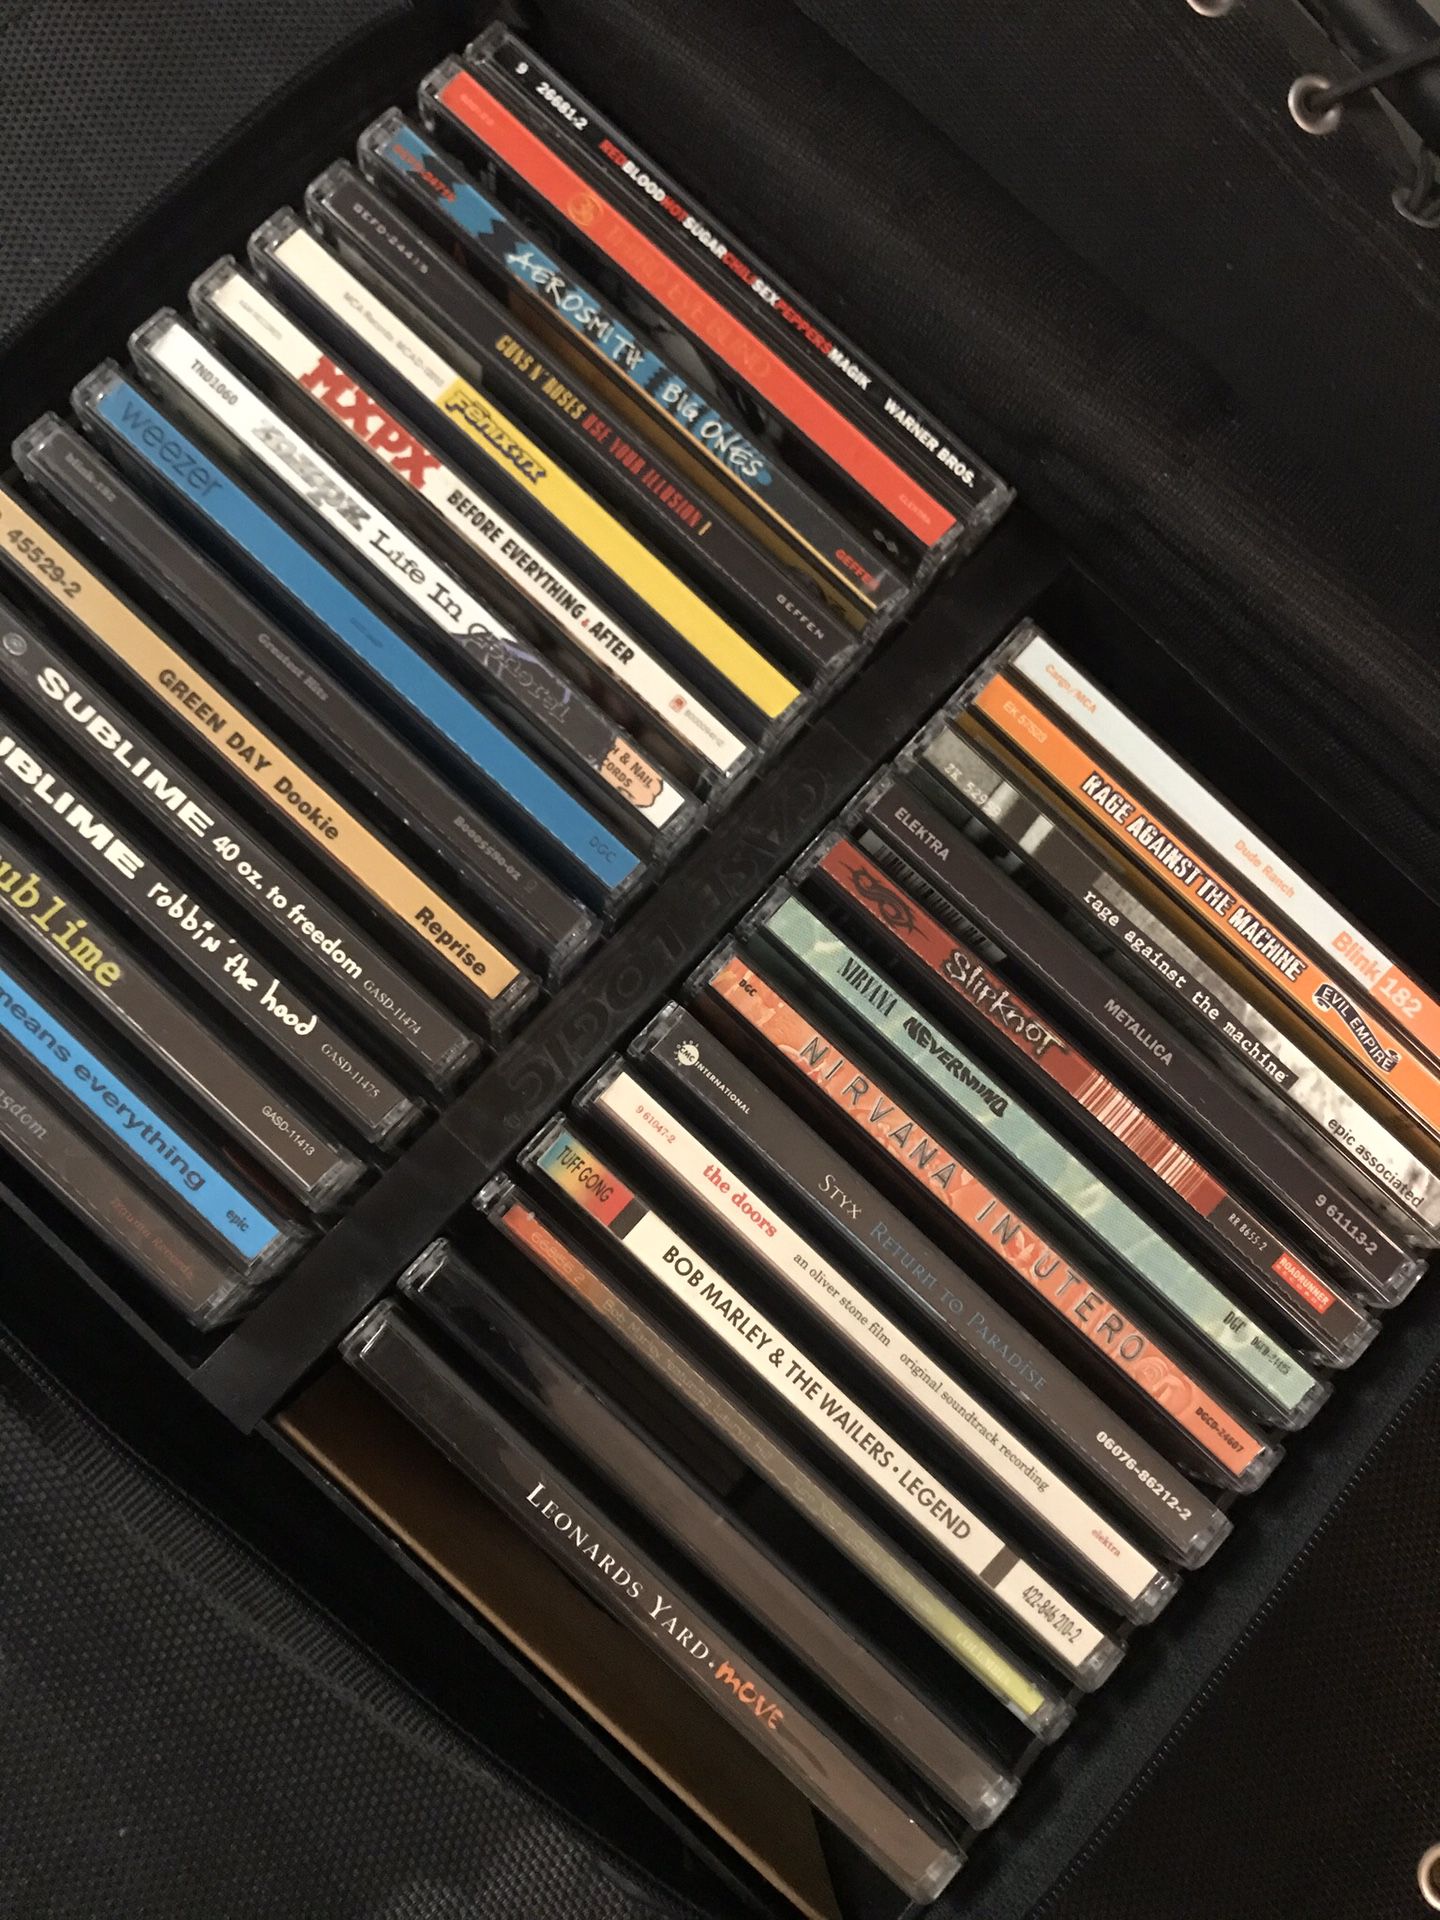 Rock Music CD collection